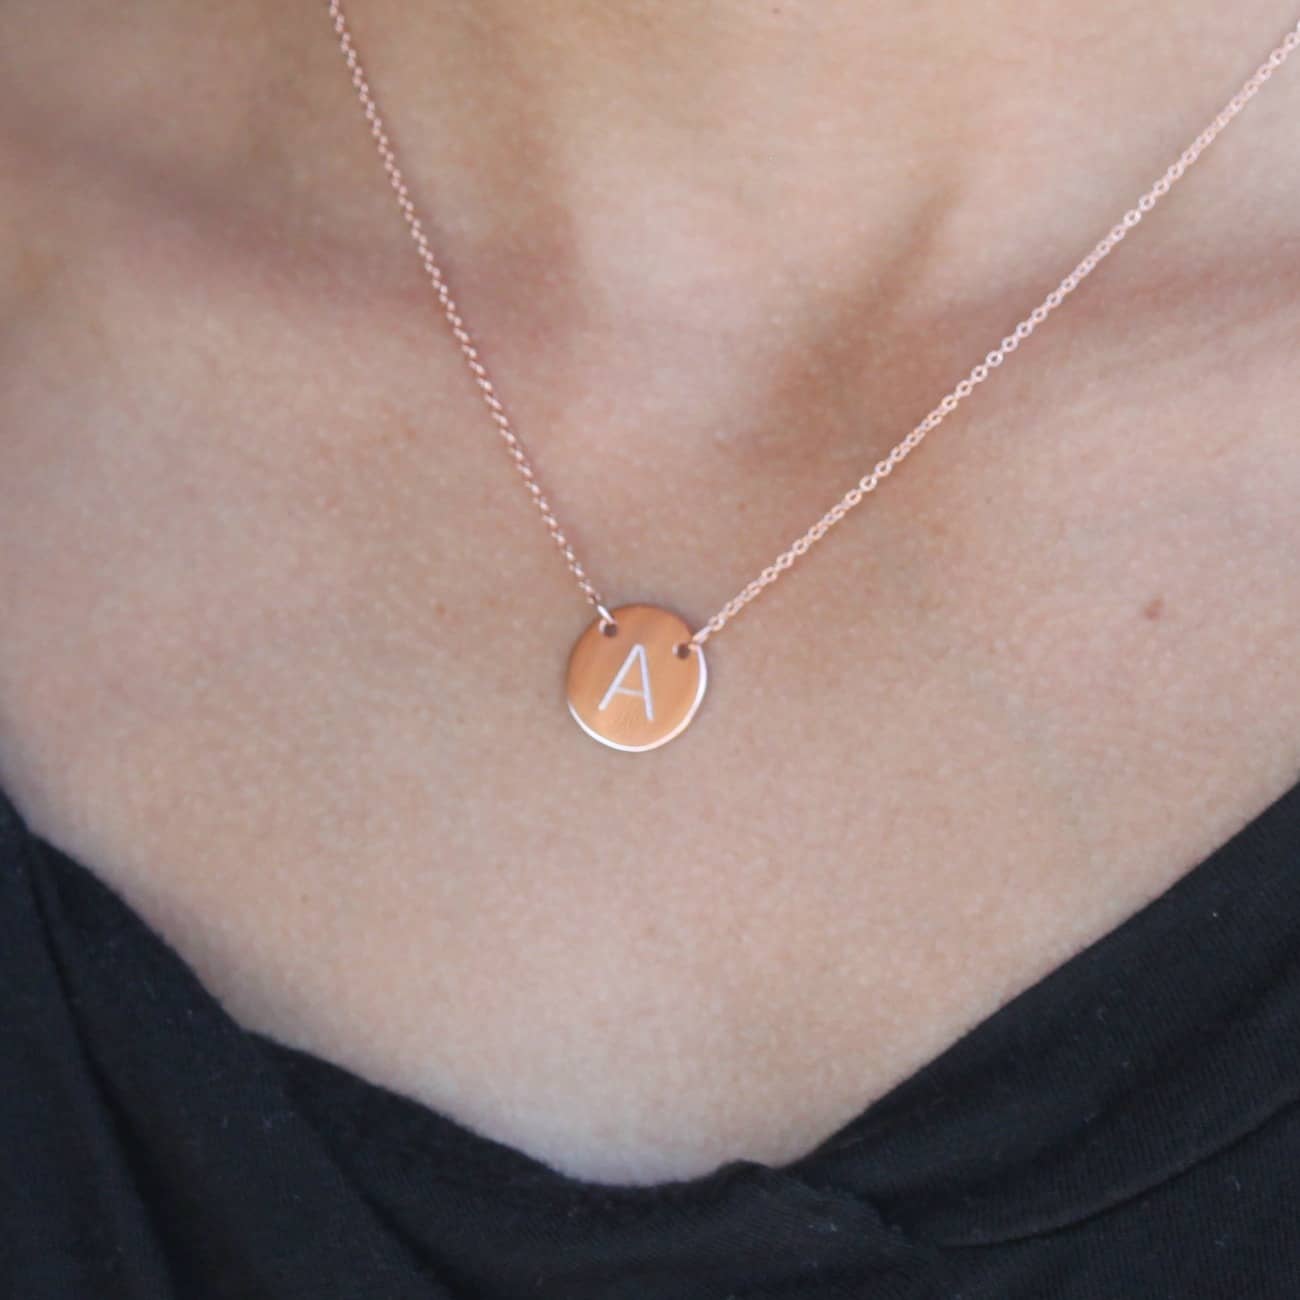 Initial A engraved on rose gold disc necklace from The Silver Store